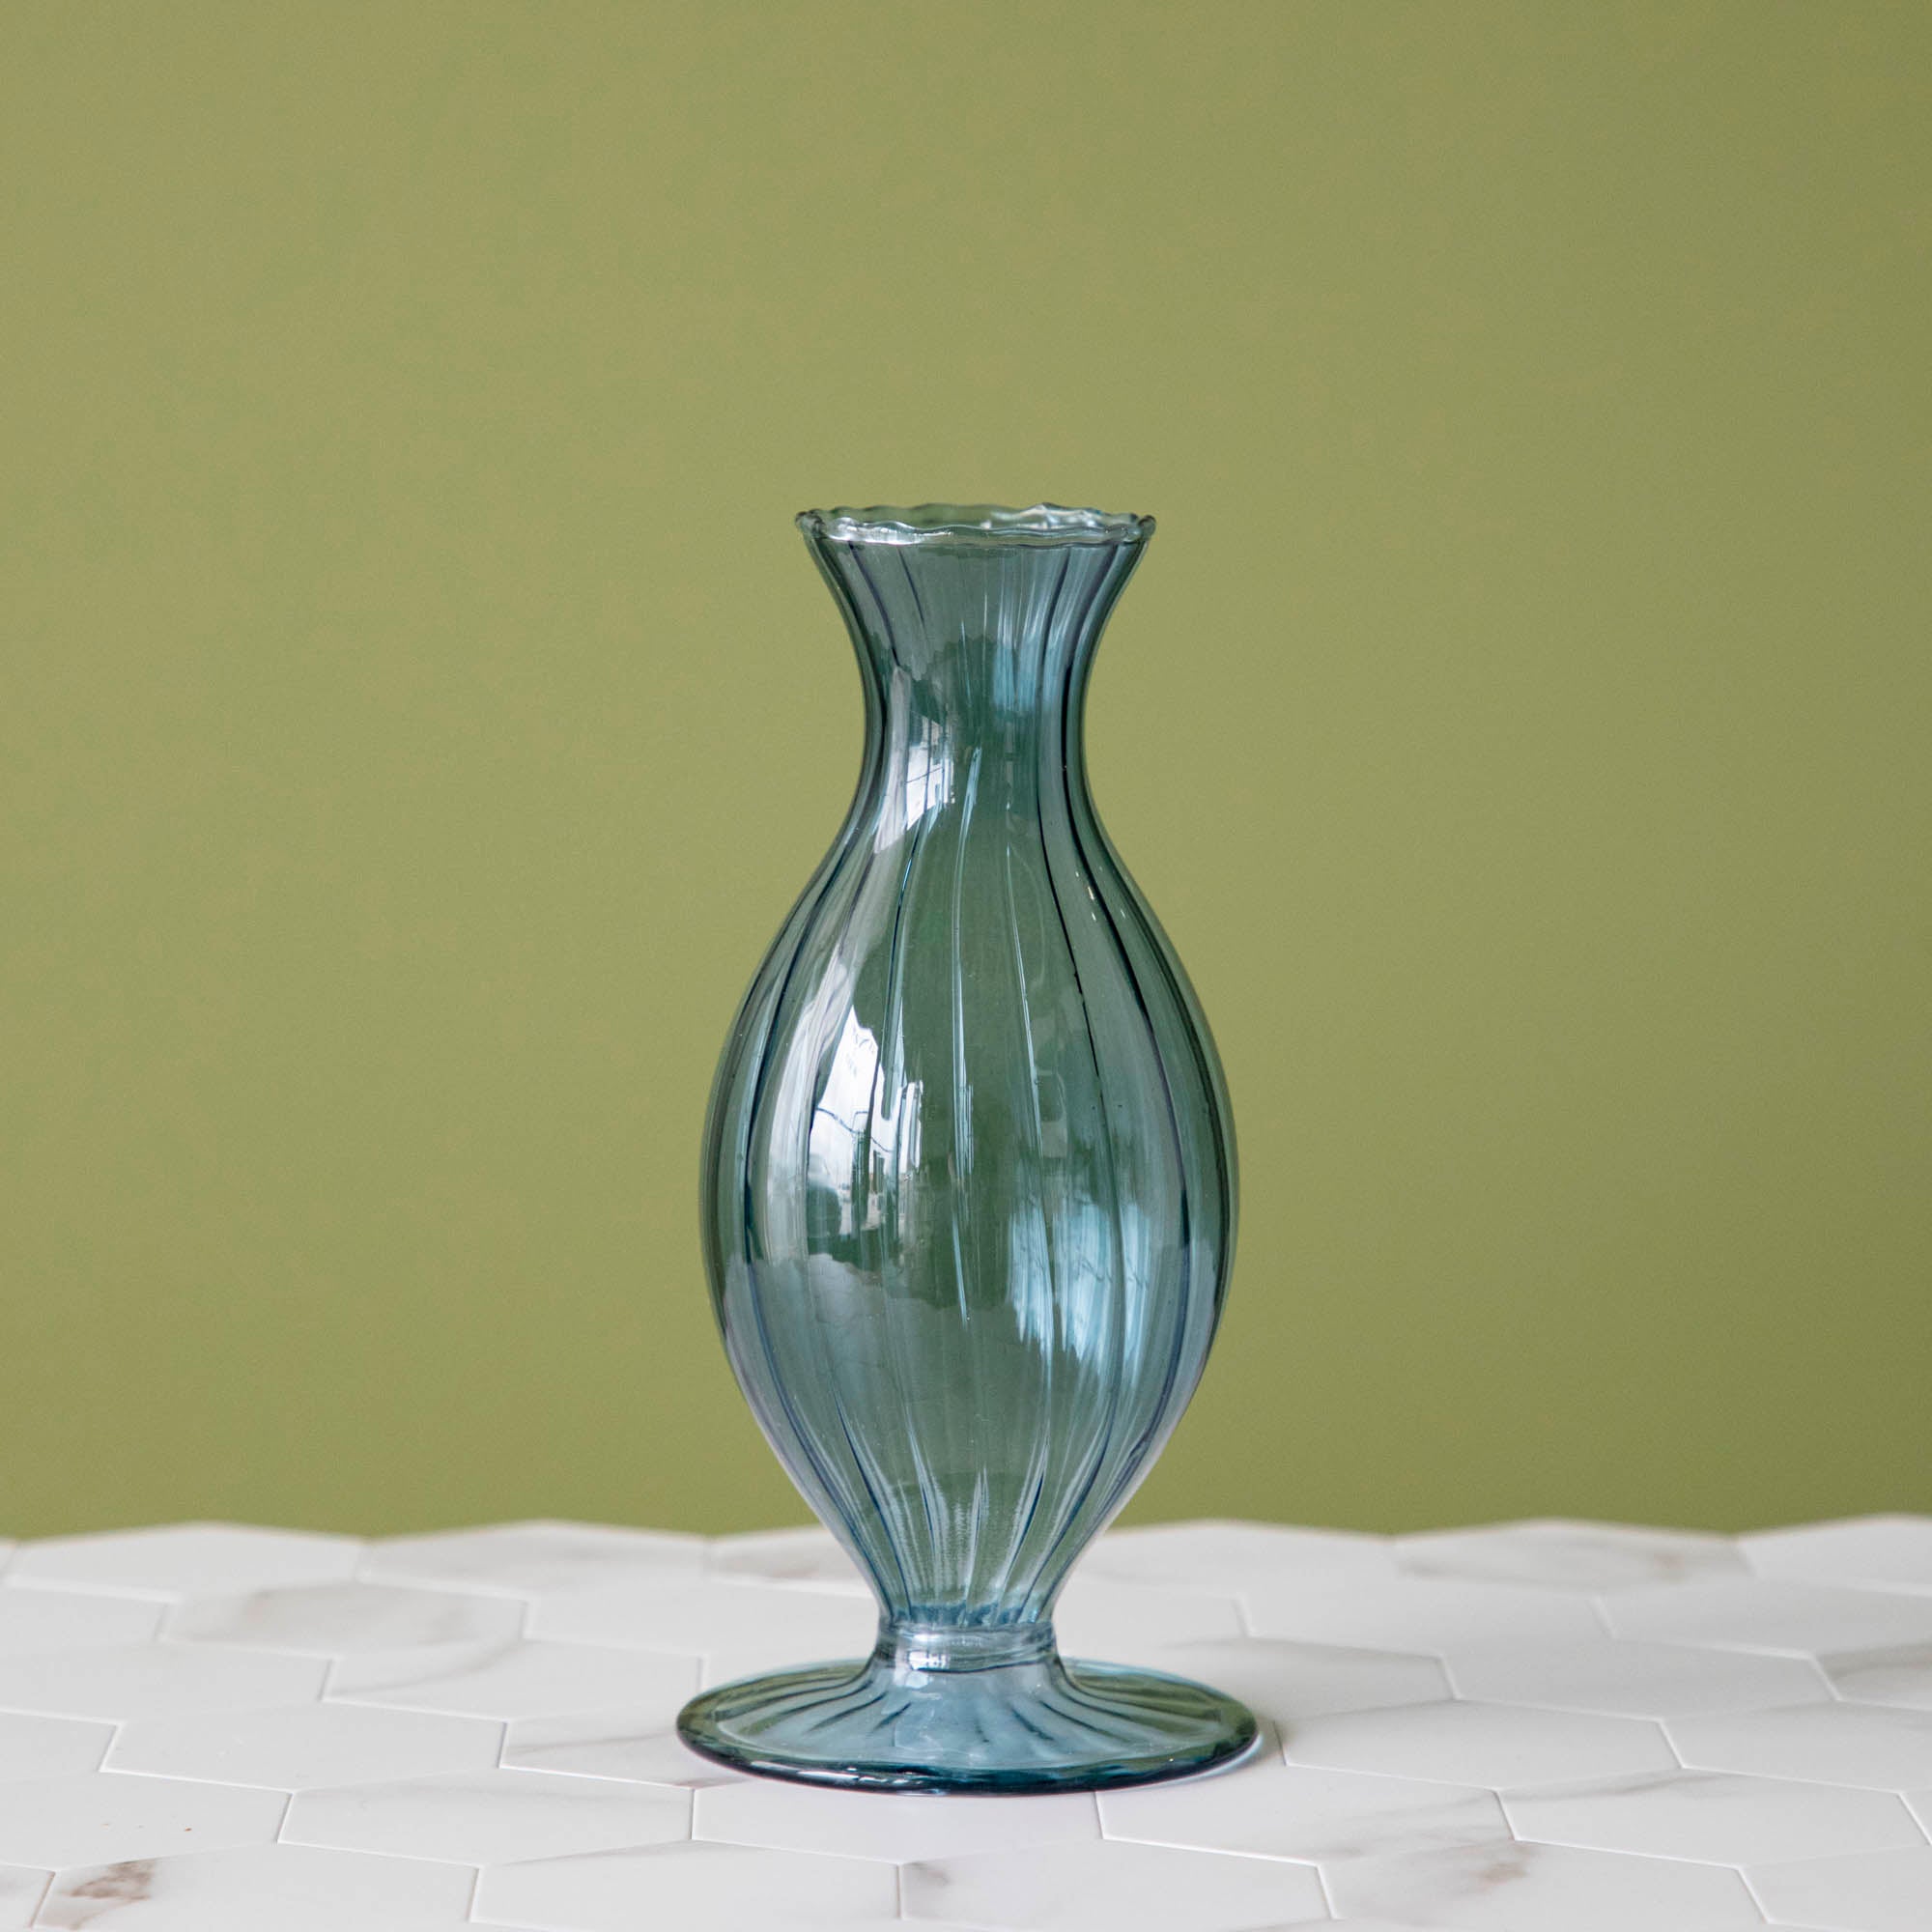 A Blue Vintage Boutique Vase by Accent Decor sitting on top of a table.